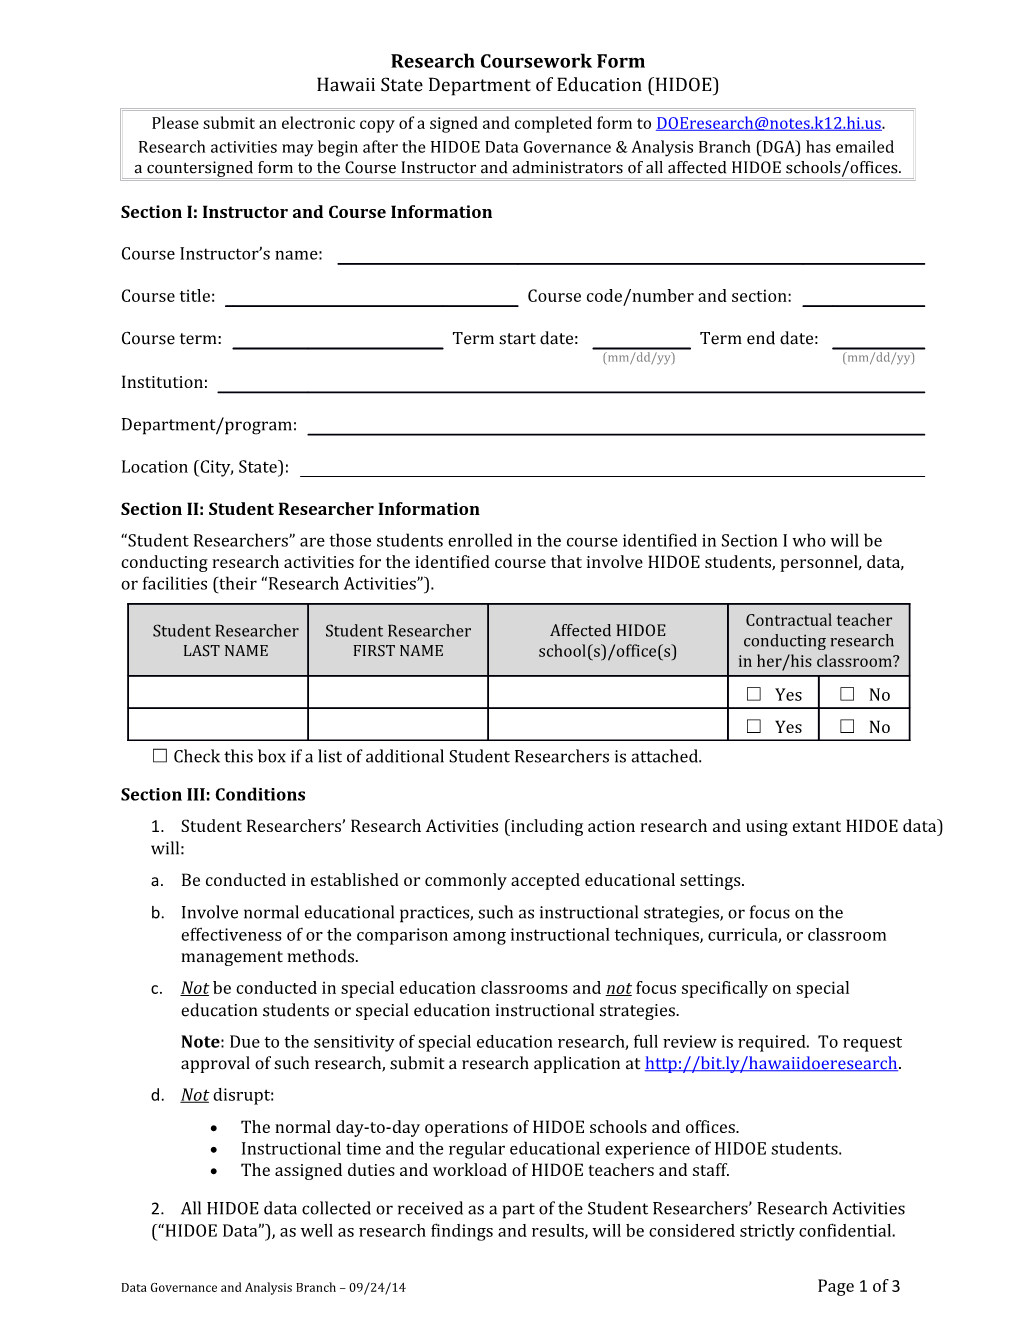 HIDOE Research Coursework Form